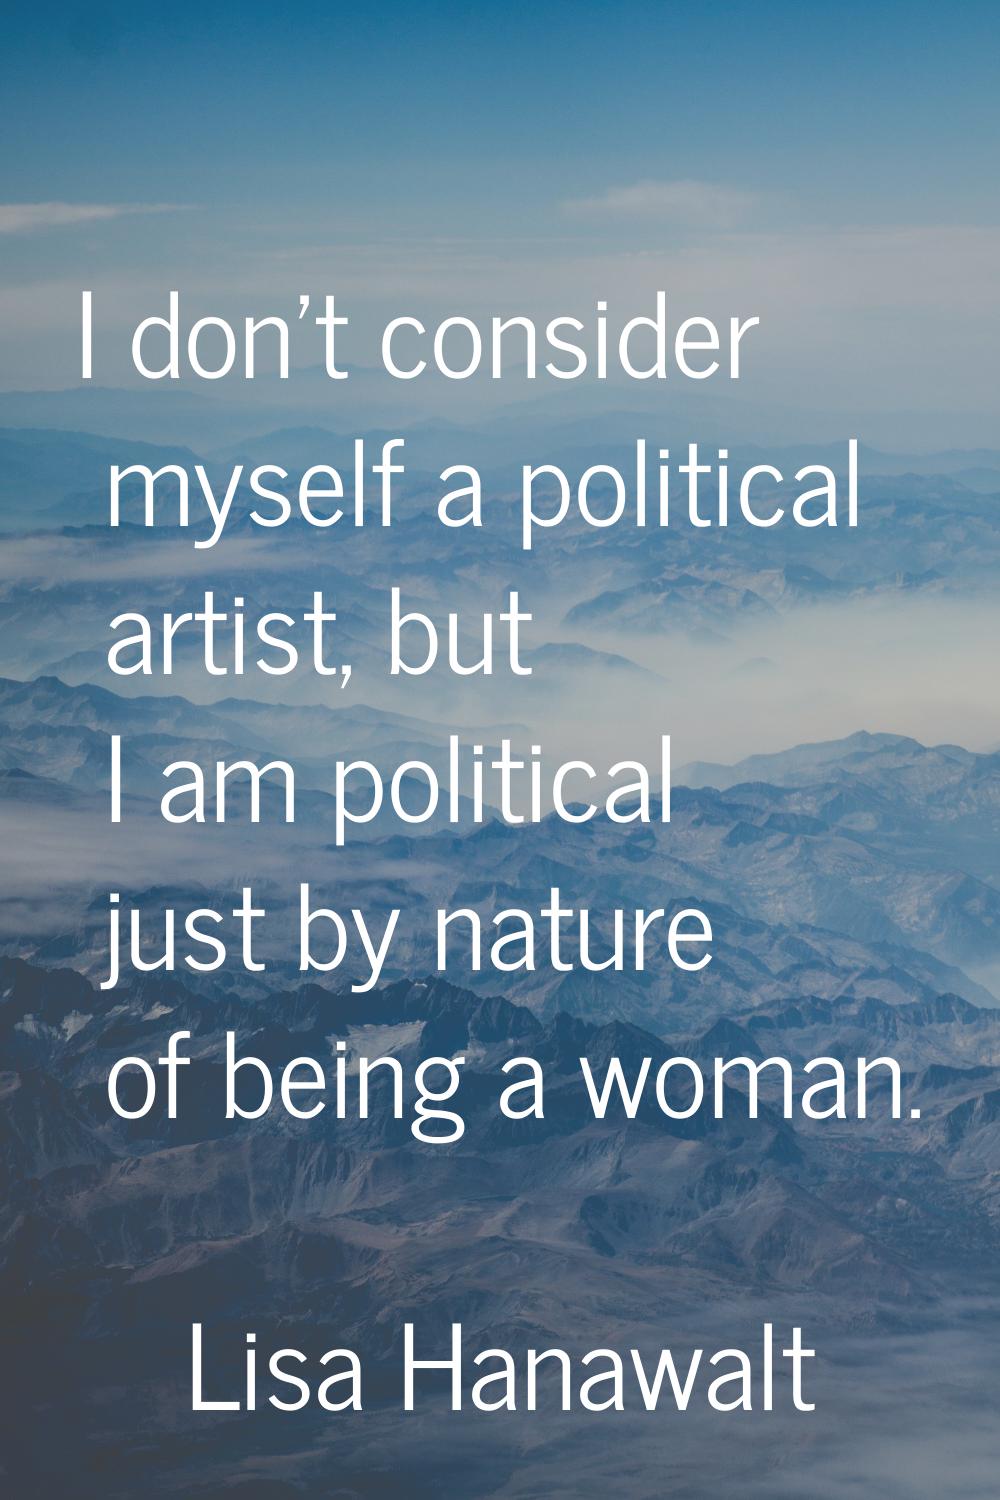 I don't consider myself a political artist, but I am political just by nature of being a woman.